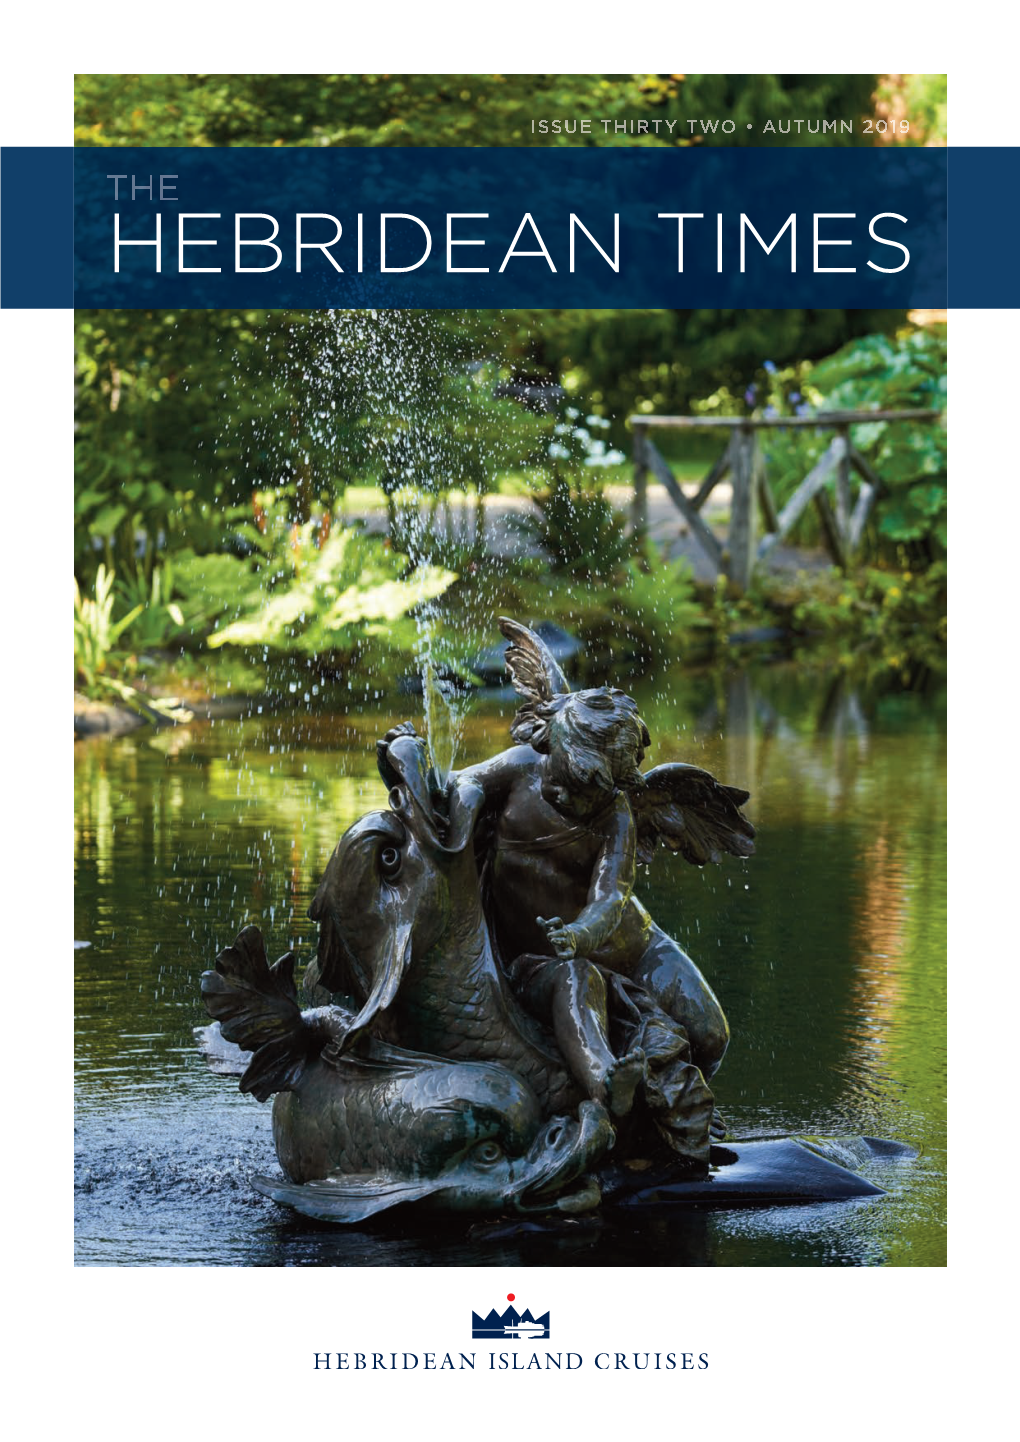 Hebridean Times HEB TIMES Issue 32.Qxp Layout 1 14/08/2019 15:47 Page 2